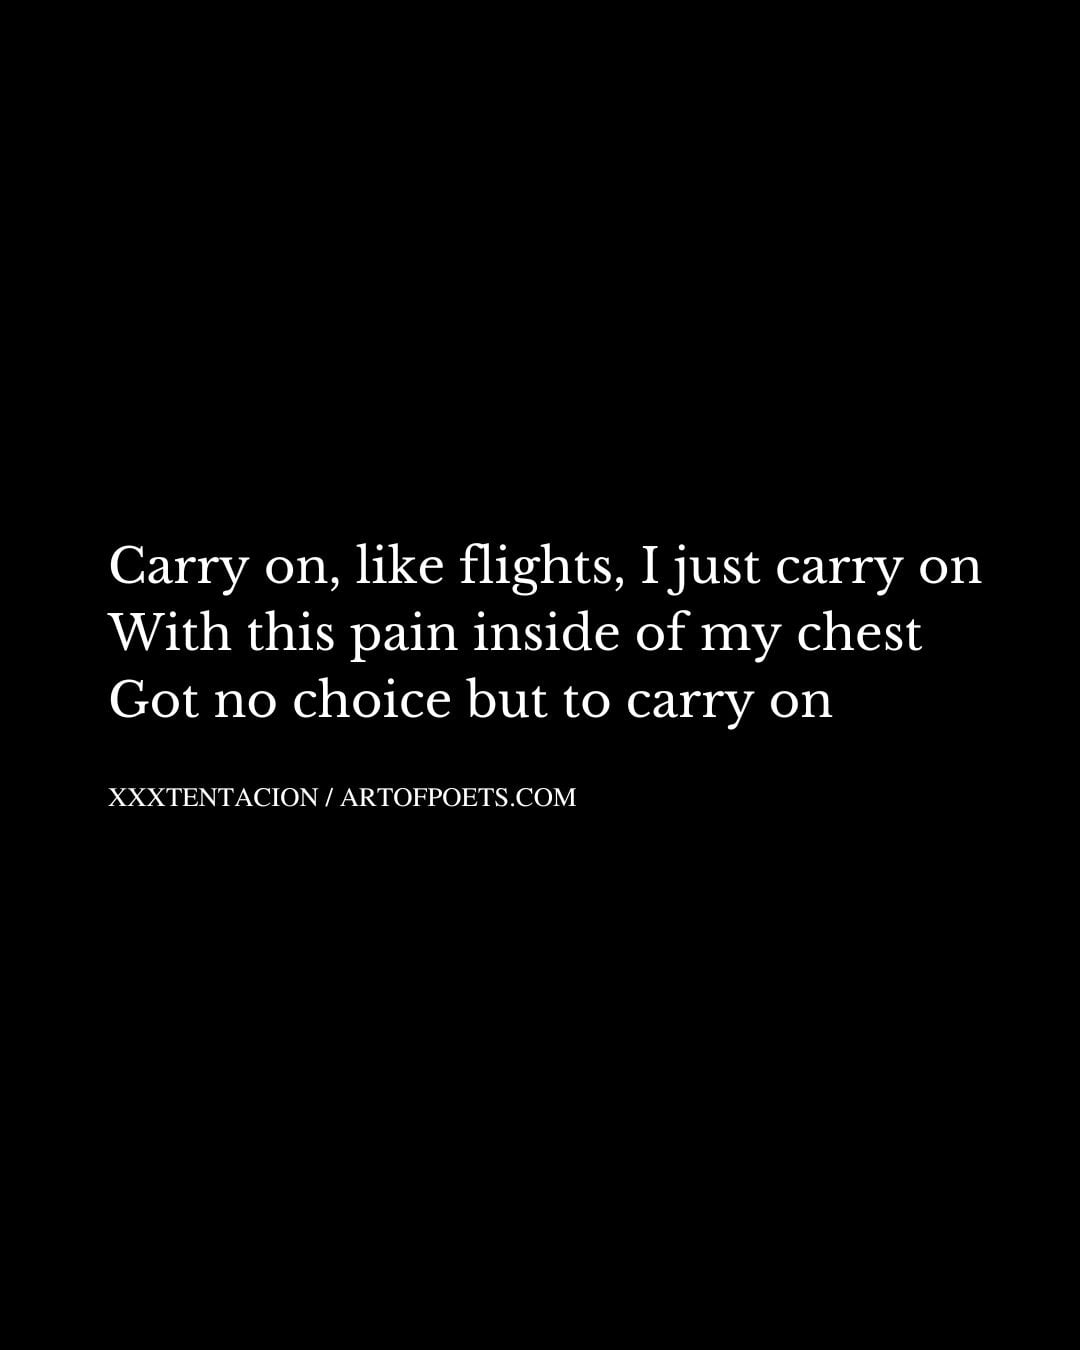 Carry on like flights I just carry on With this pain inside of my chest Got no choice but to carry on